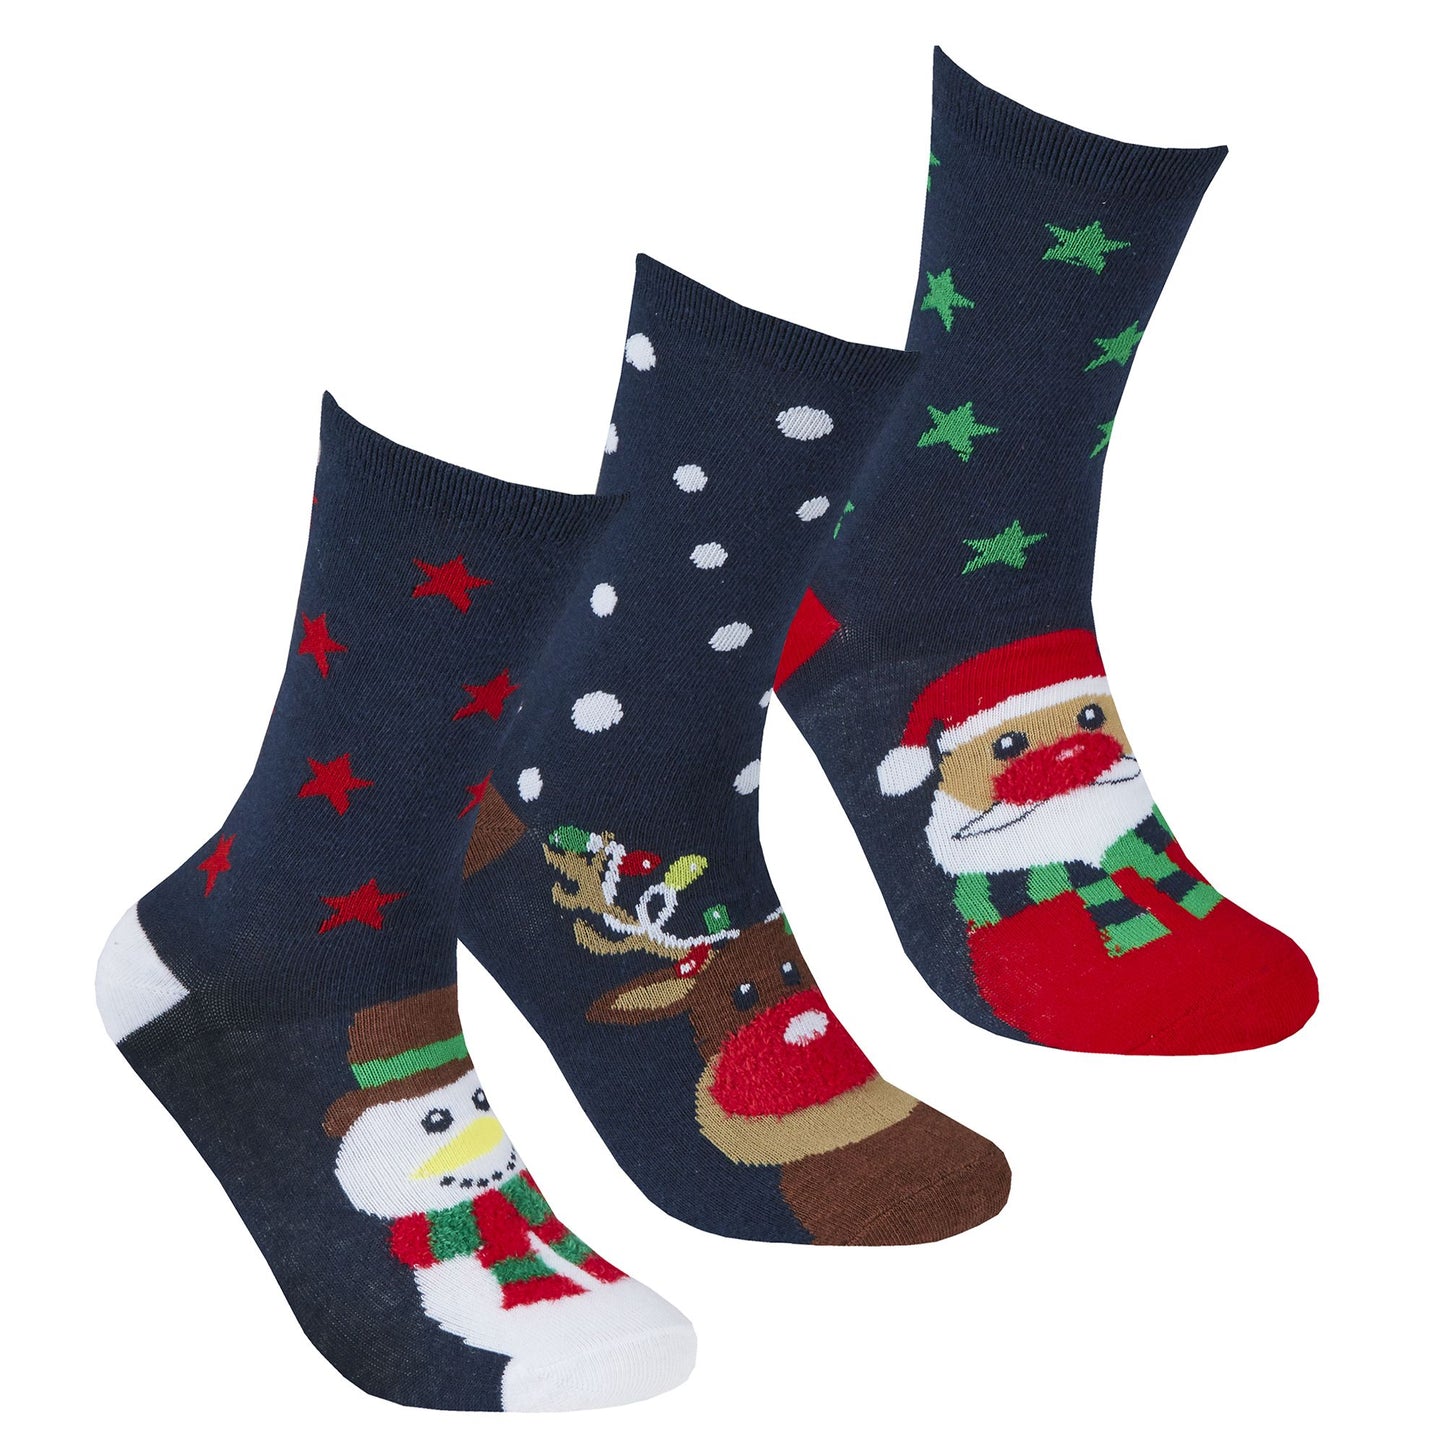 Adults 2 x 3 Packs of Christmas Socks In Carded Packs